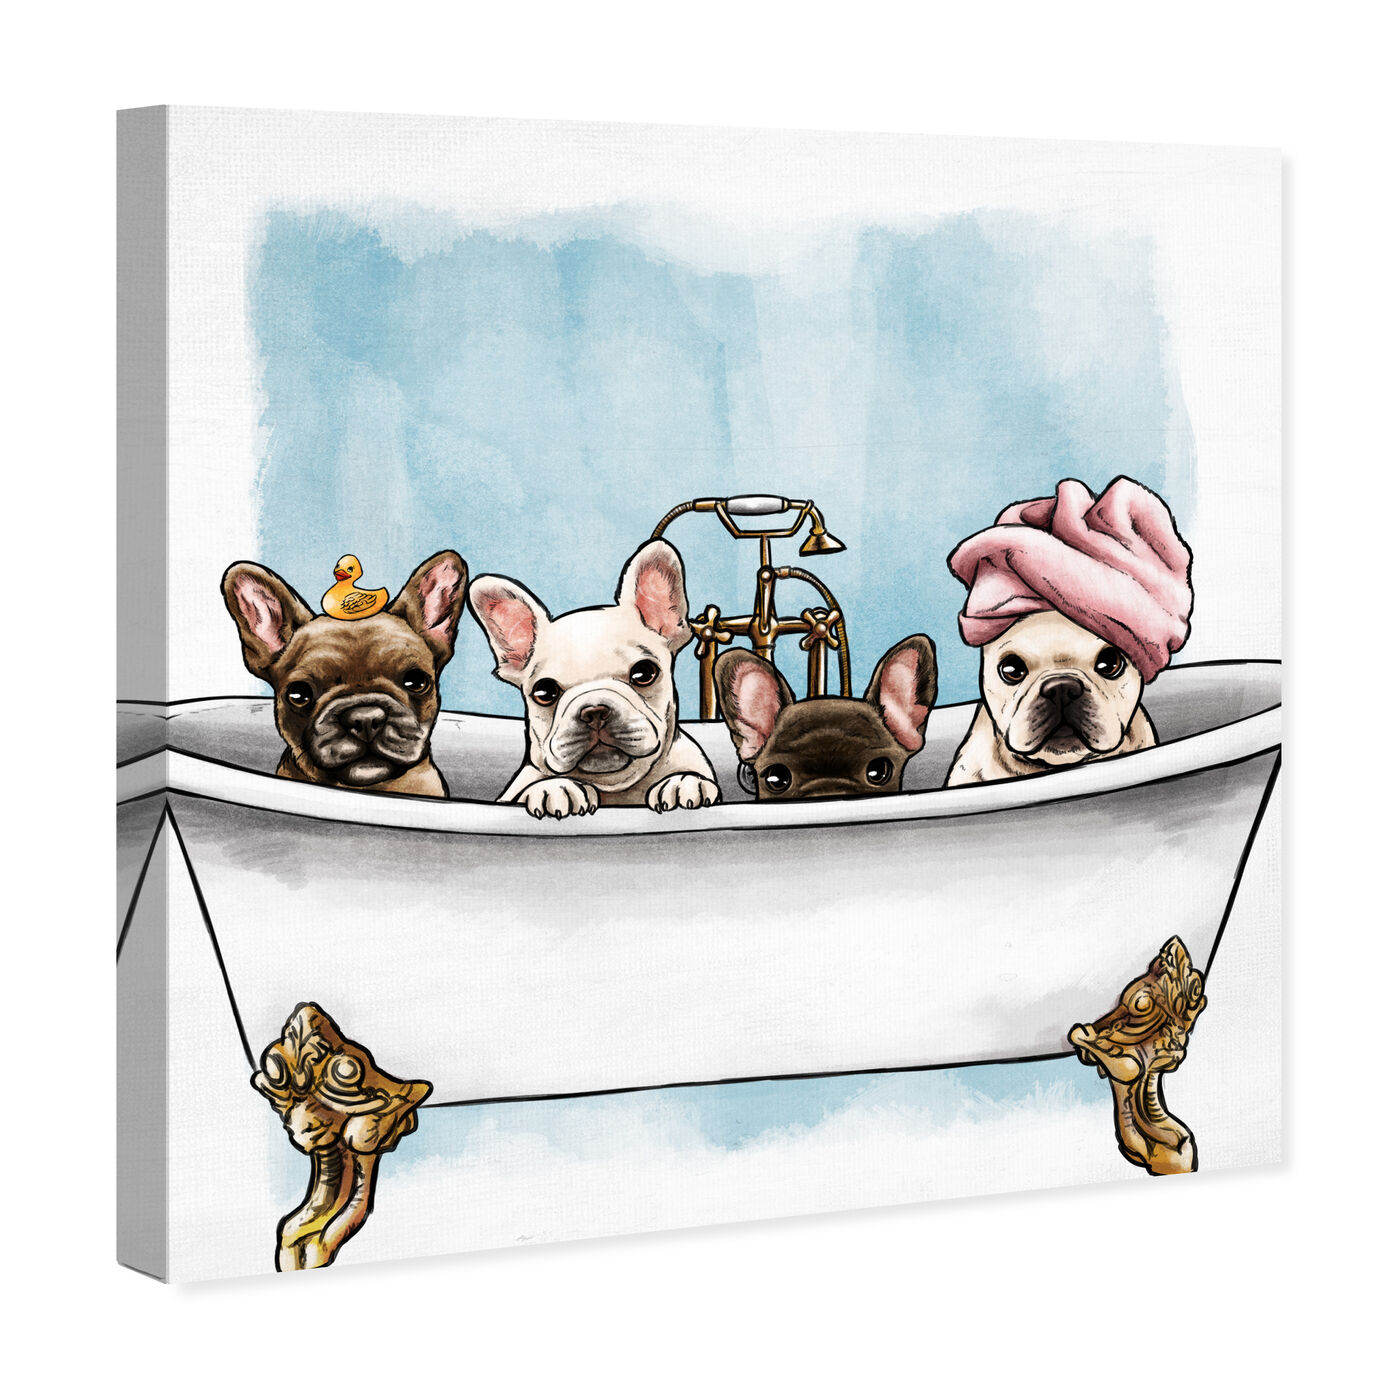 Frenchies In The Tub